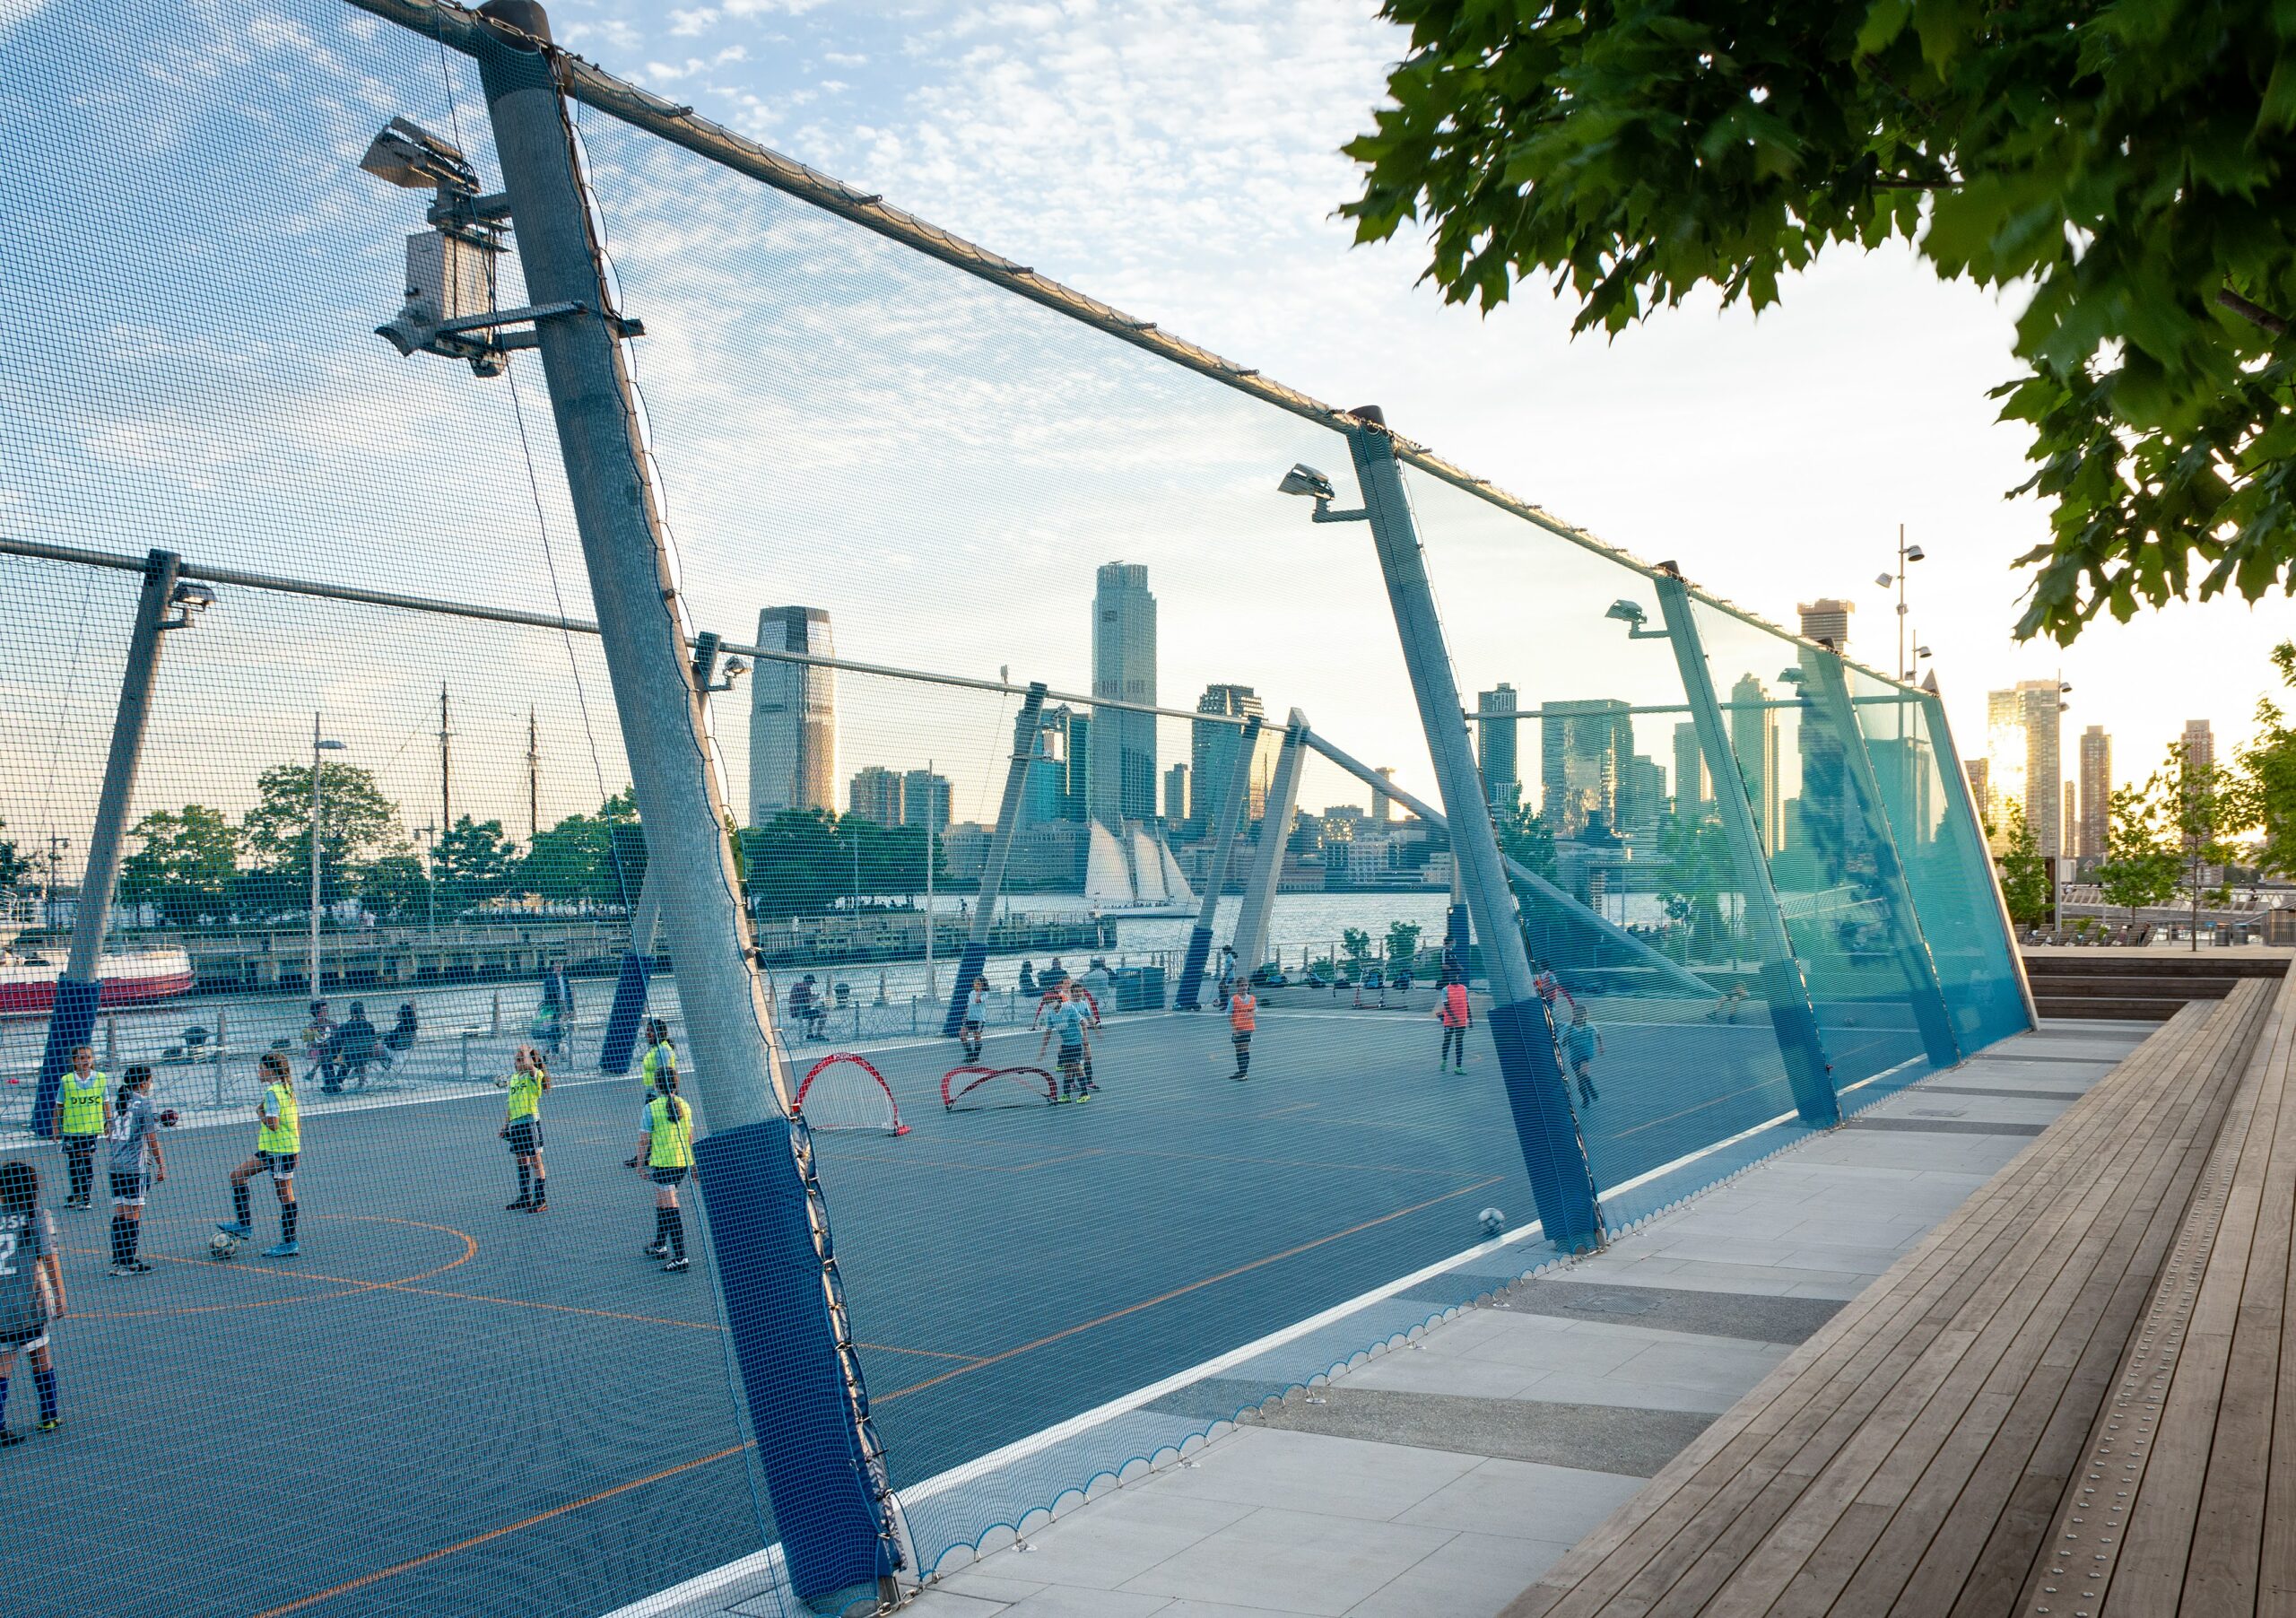 Side view of a fenced off area for children's sports at The Tide Deck at Pier 26 featuring kebony modified wood Clear Boardwalk Decking during a sunset with the city skyline in the background at Hudson River Park in New York City New York Downtown New York City